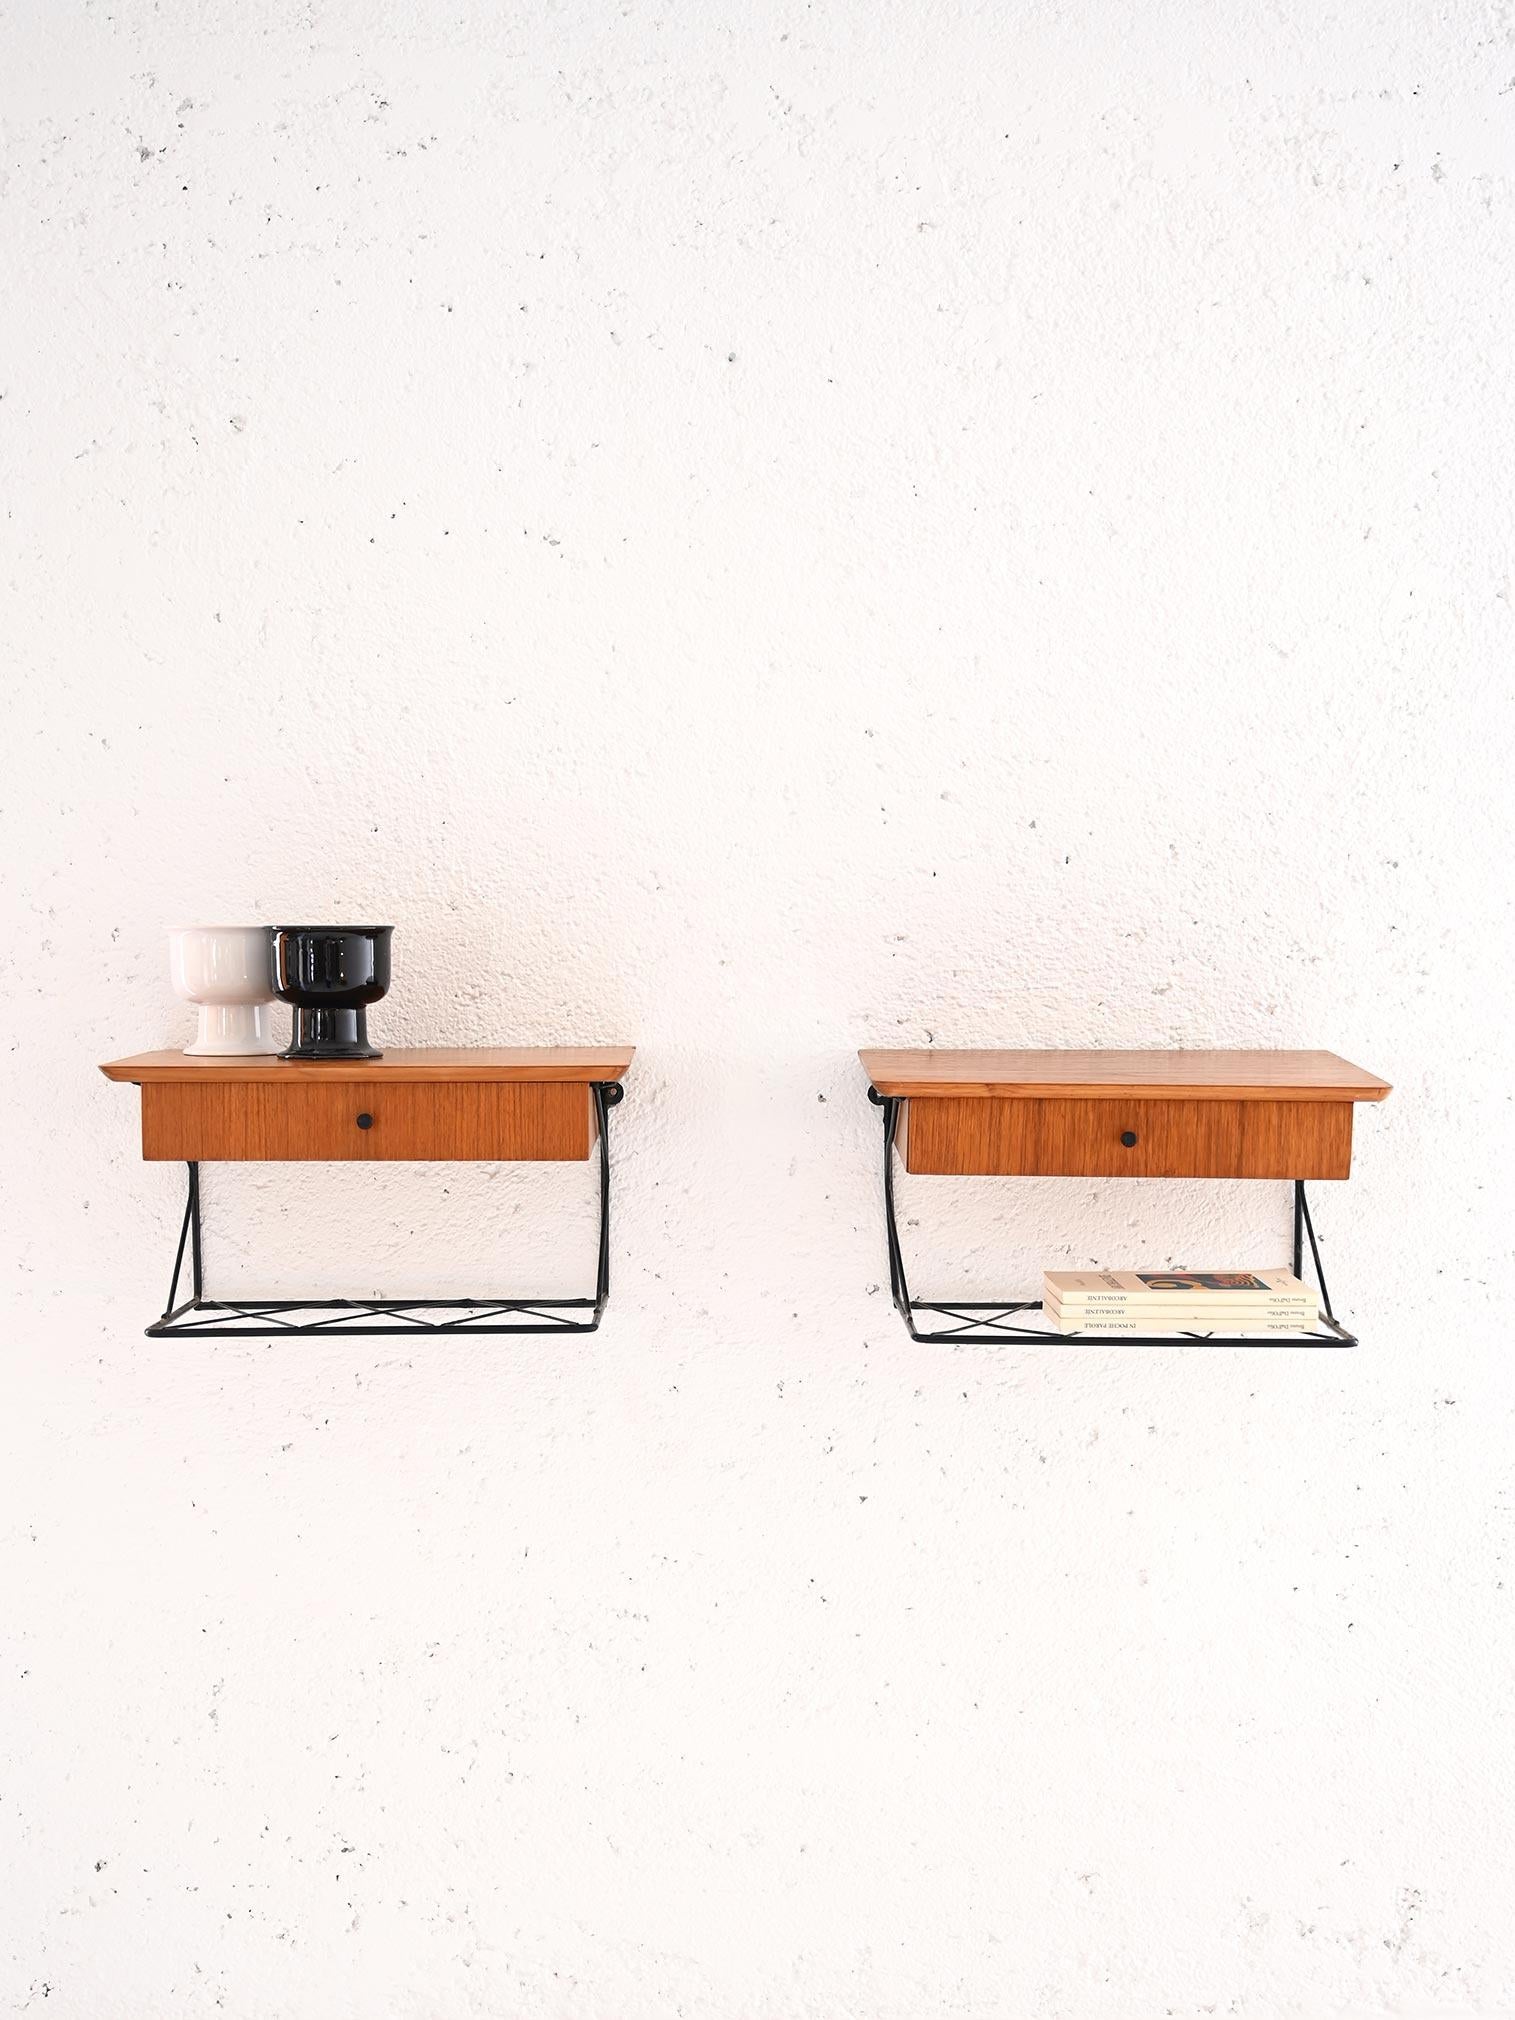 Scandinavian teak and metal bedside tables.

These modern furniture pieces trace the lines and taste of mid-century Nordic design. Formed of a teak top and drawer, there is also a black metal magazine rack top. The black knob detail on the drawers